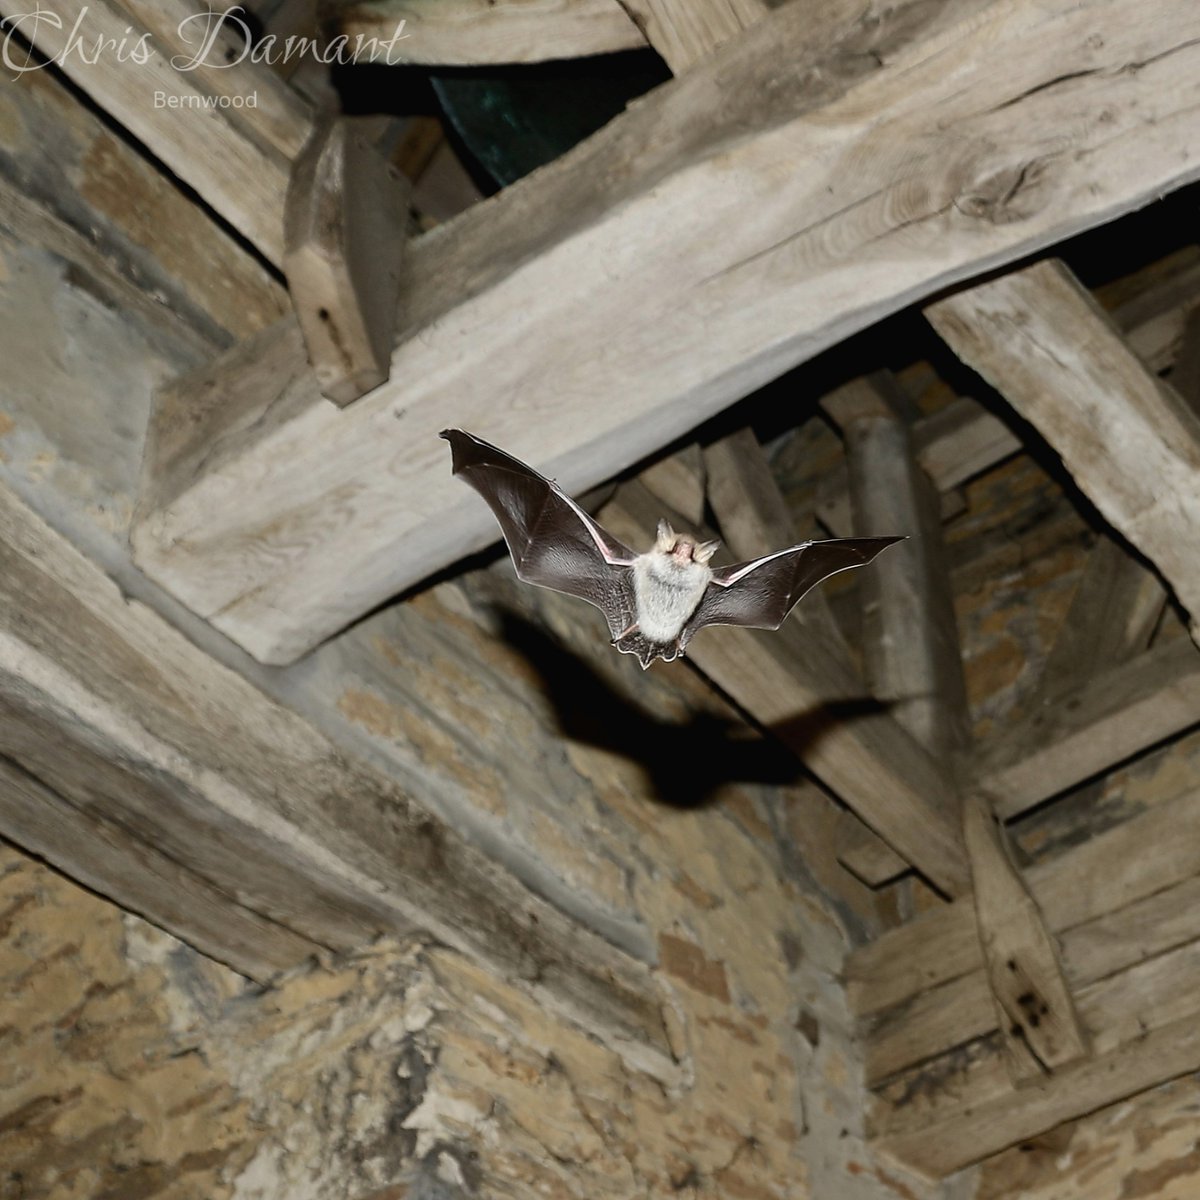 Ever wondered why bats are attracted to churches? 🦇 Our @BatsinChurches partnership project featured on @BBCCountryfile yesterday, showcasing how medieval churches provide a safe space for bats to roost. Watch the #Countryfile episode: bbc.co.uk/iplayer/episod…